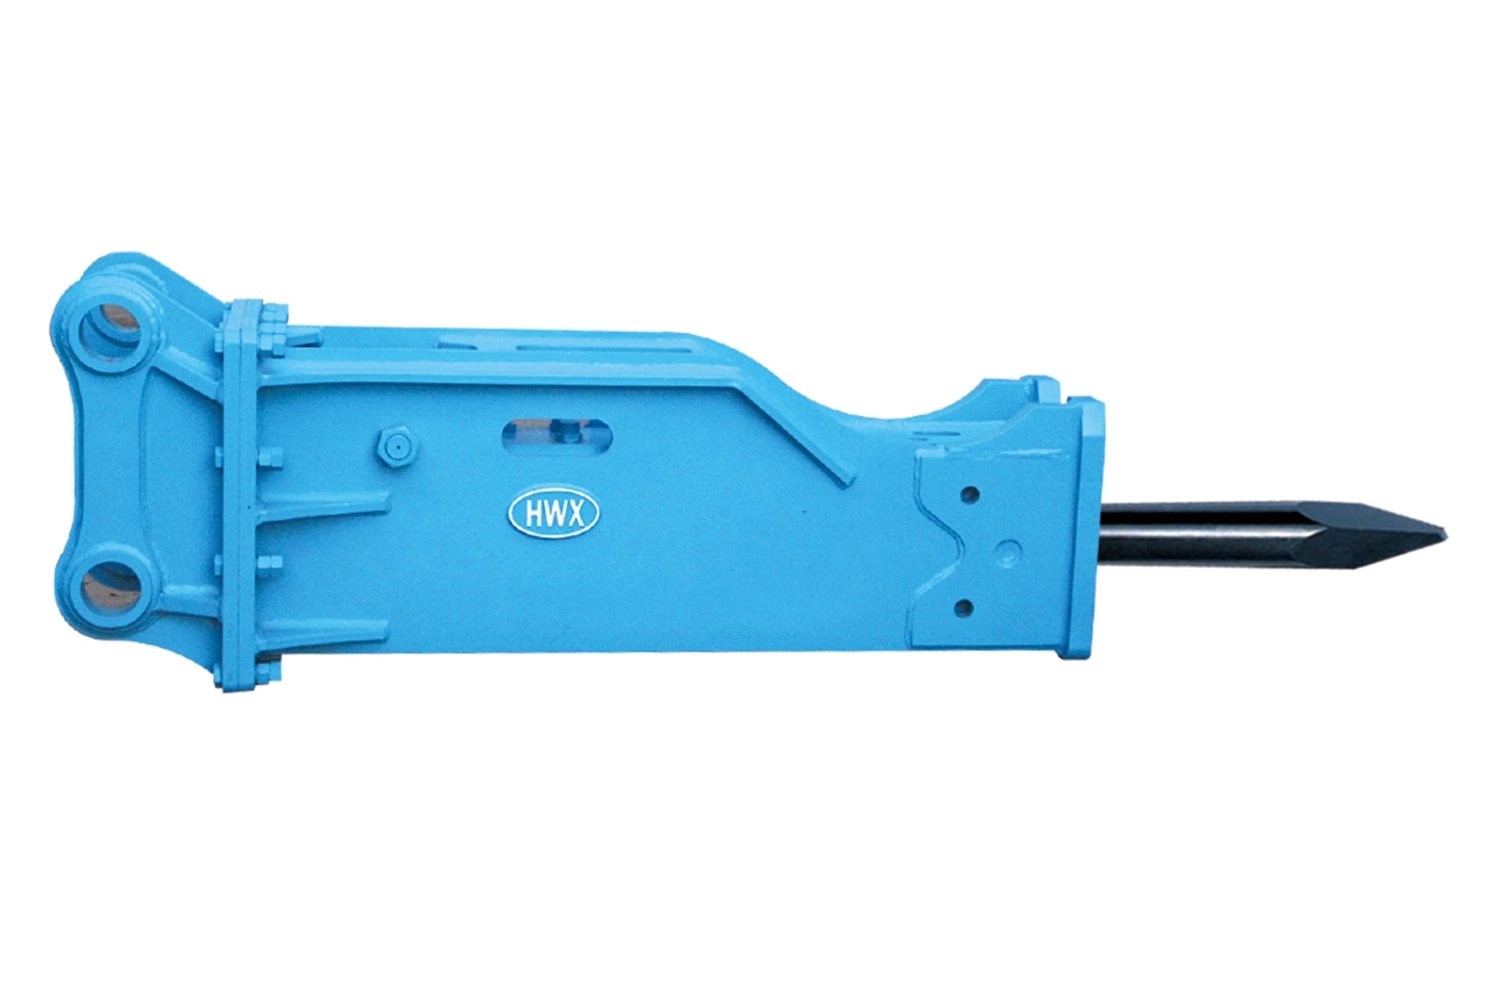 Construction Machinery Parts Hwx Sb81 Silent Hydraulic Hammer Power Concrete Rock Breaker for Excavator